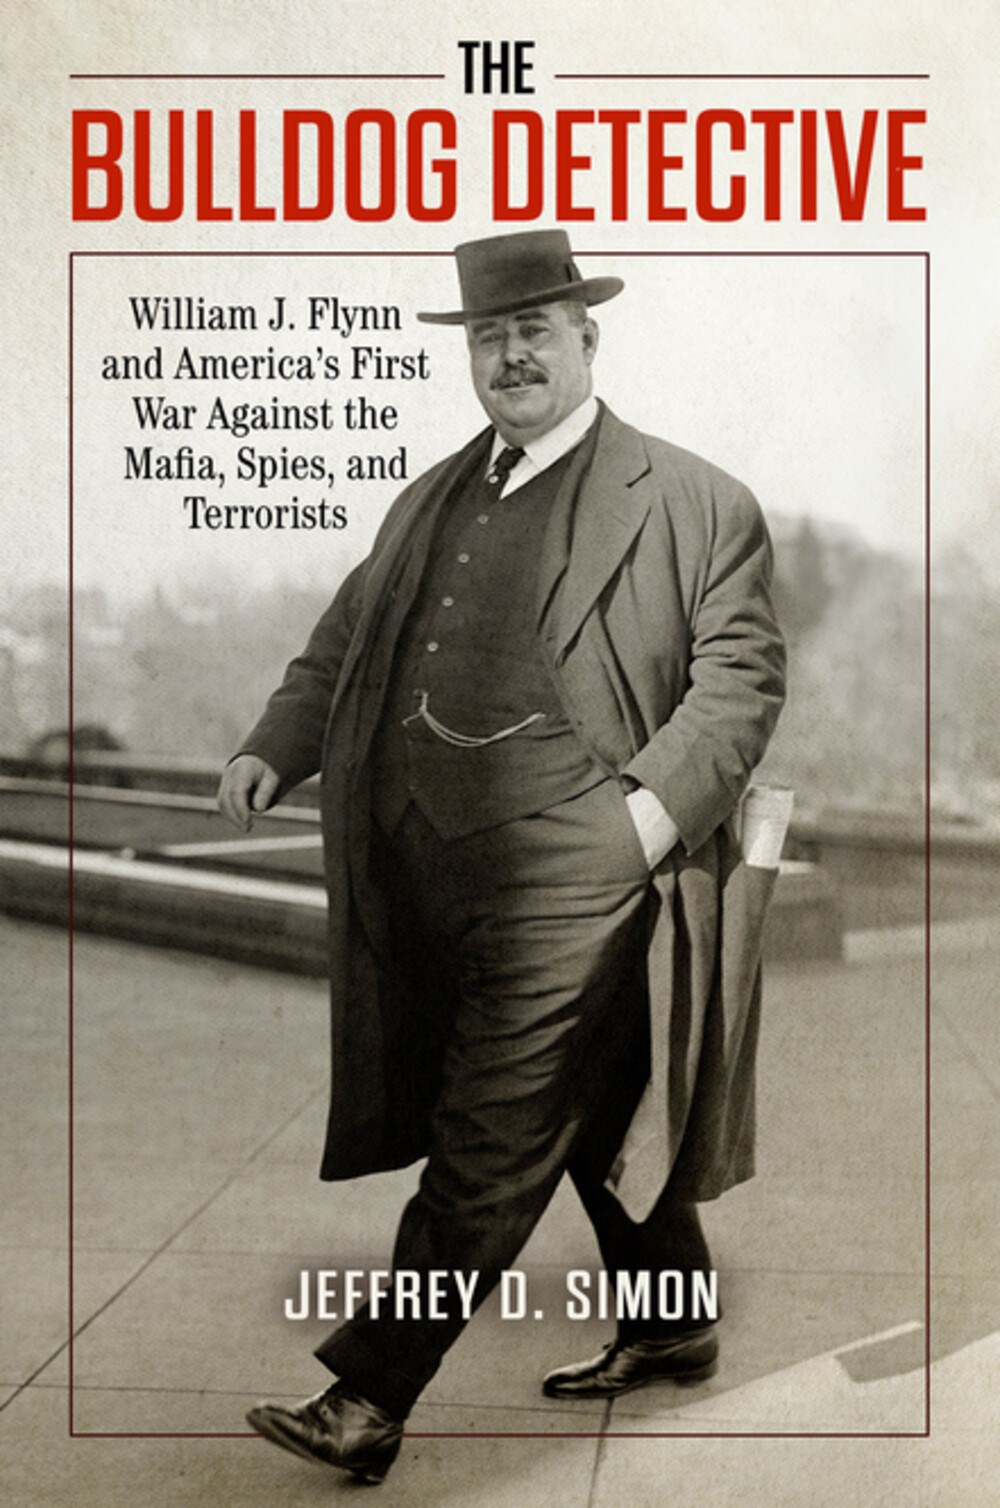 The Bulldog Detective: William J. Flynn and America’s First War Against the Mafia, Spies, and Terrorists